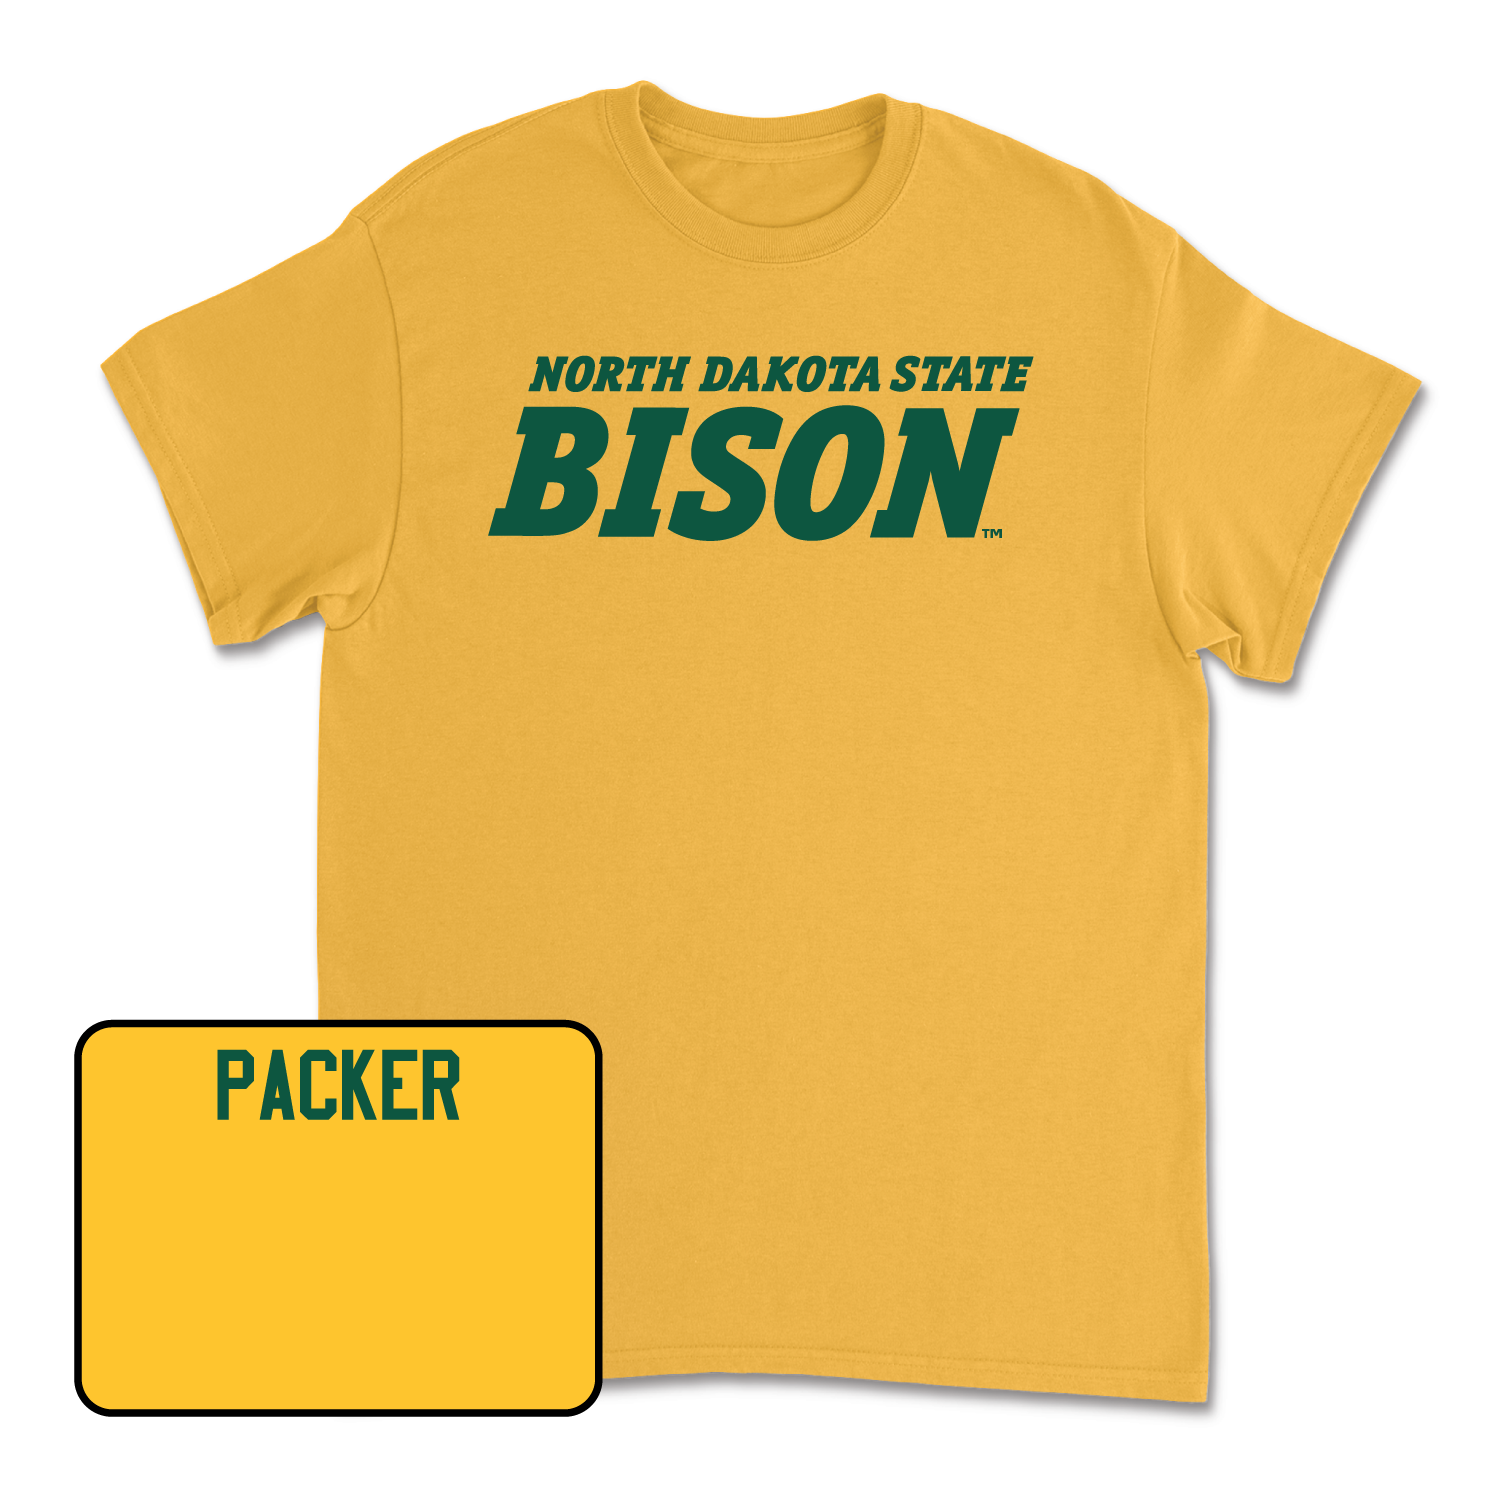 Gold Track & Field Bison Tee Youth Medium / Jack Packer